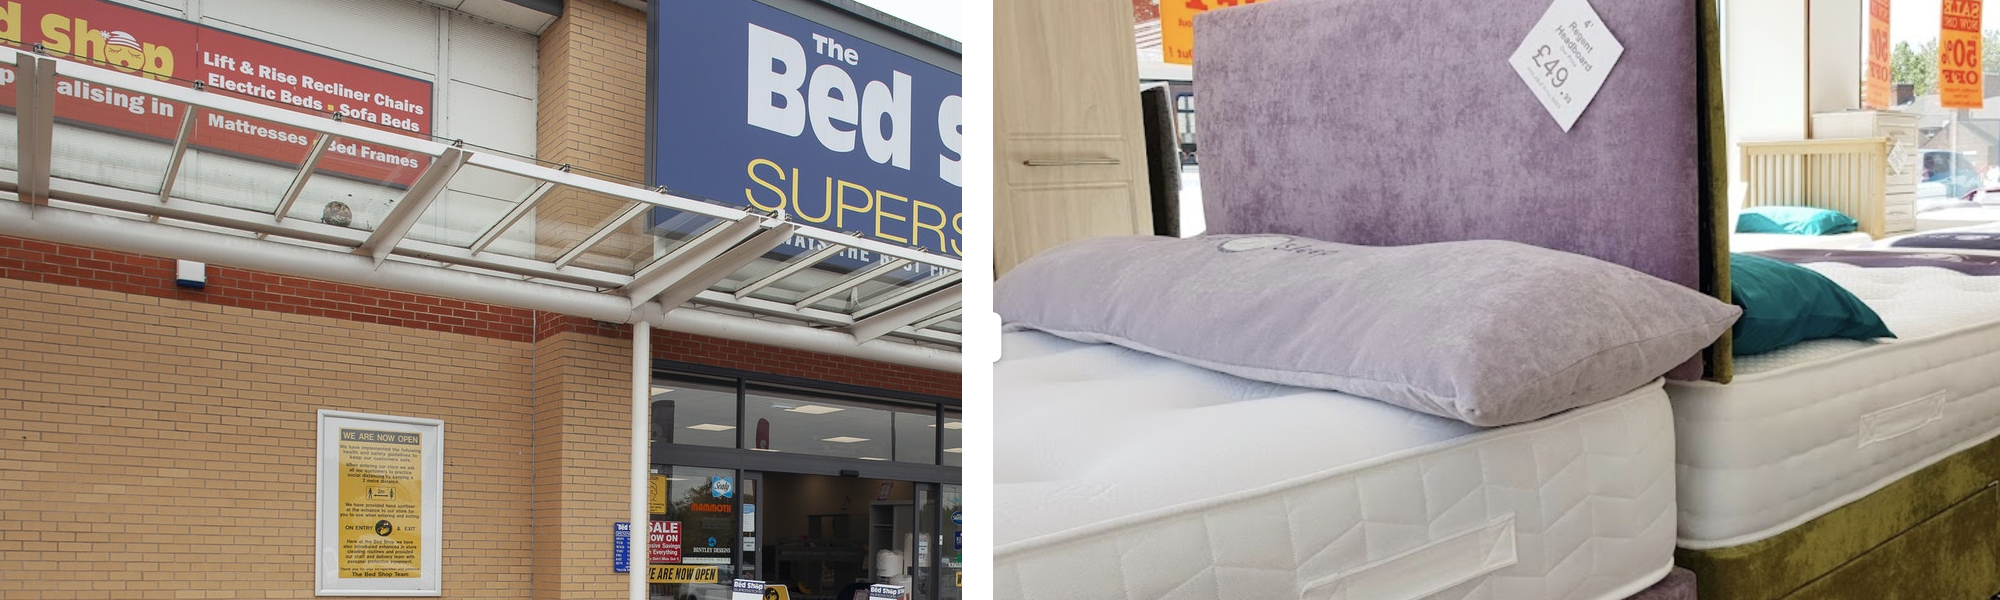 The Bed Shop Superstore in Keighley